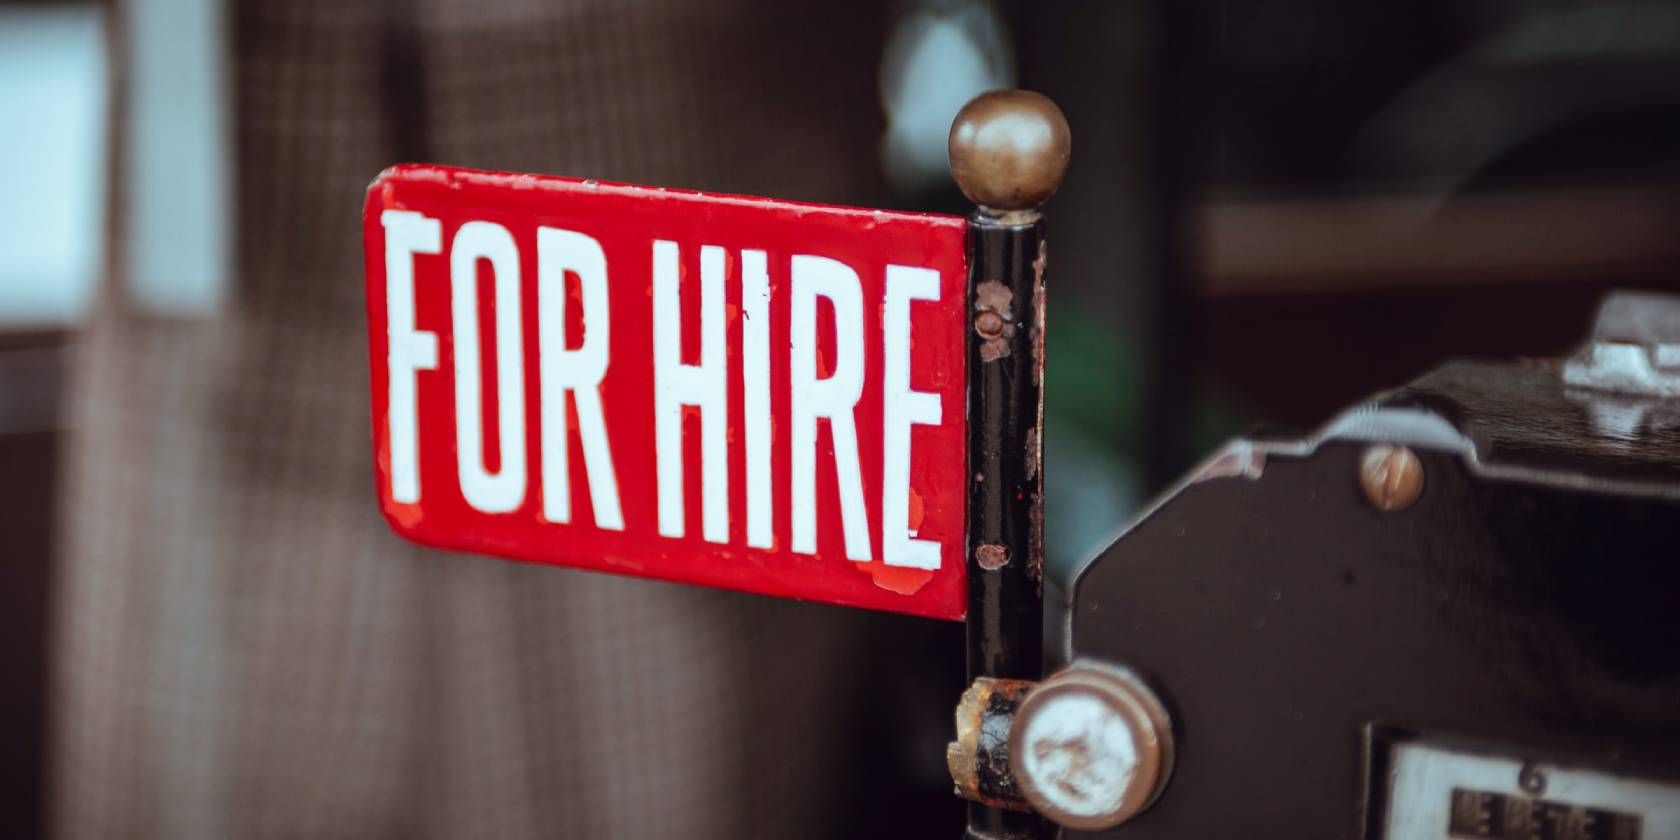 7 Unique and Niche Job Boards to Find the Perfect Workplace for You